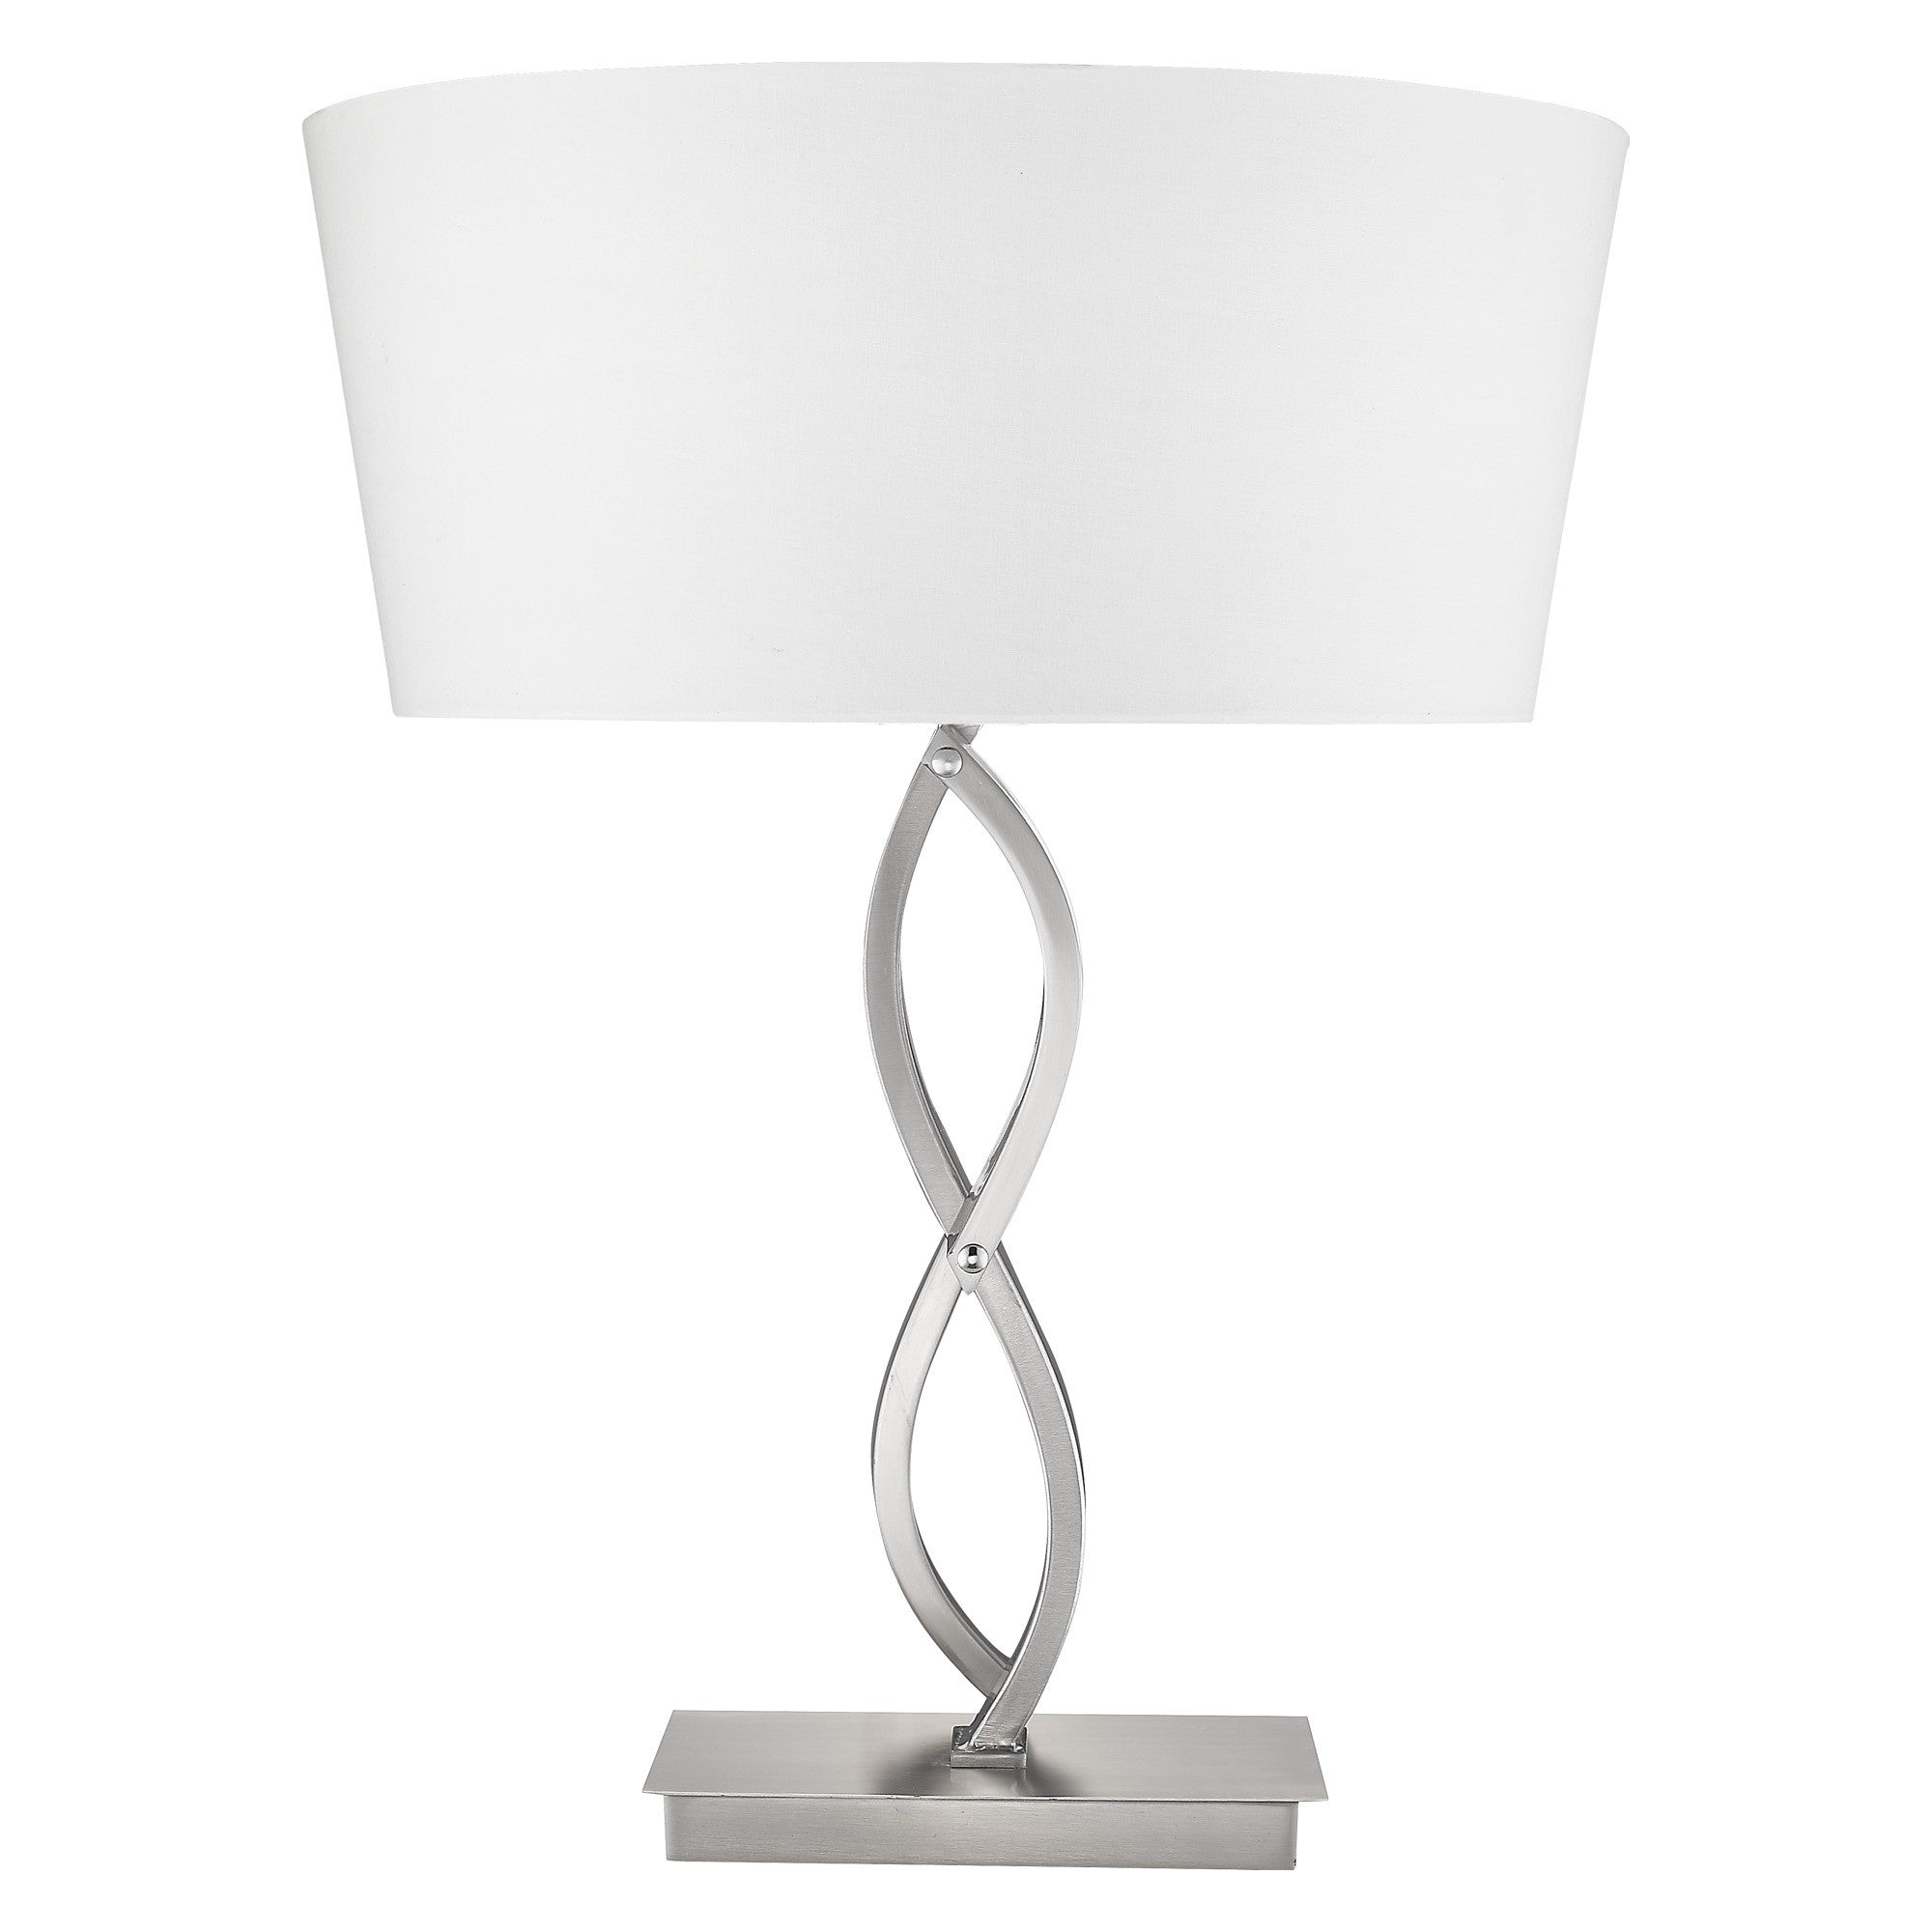 25" Silver Metal Table Lamp With White Empire Shade